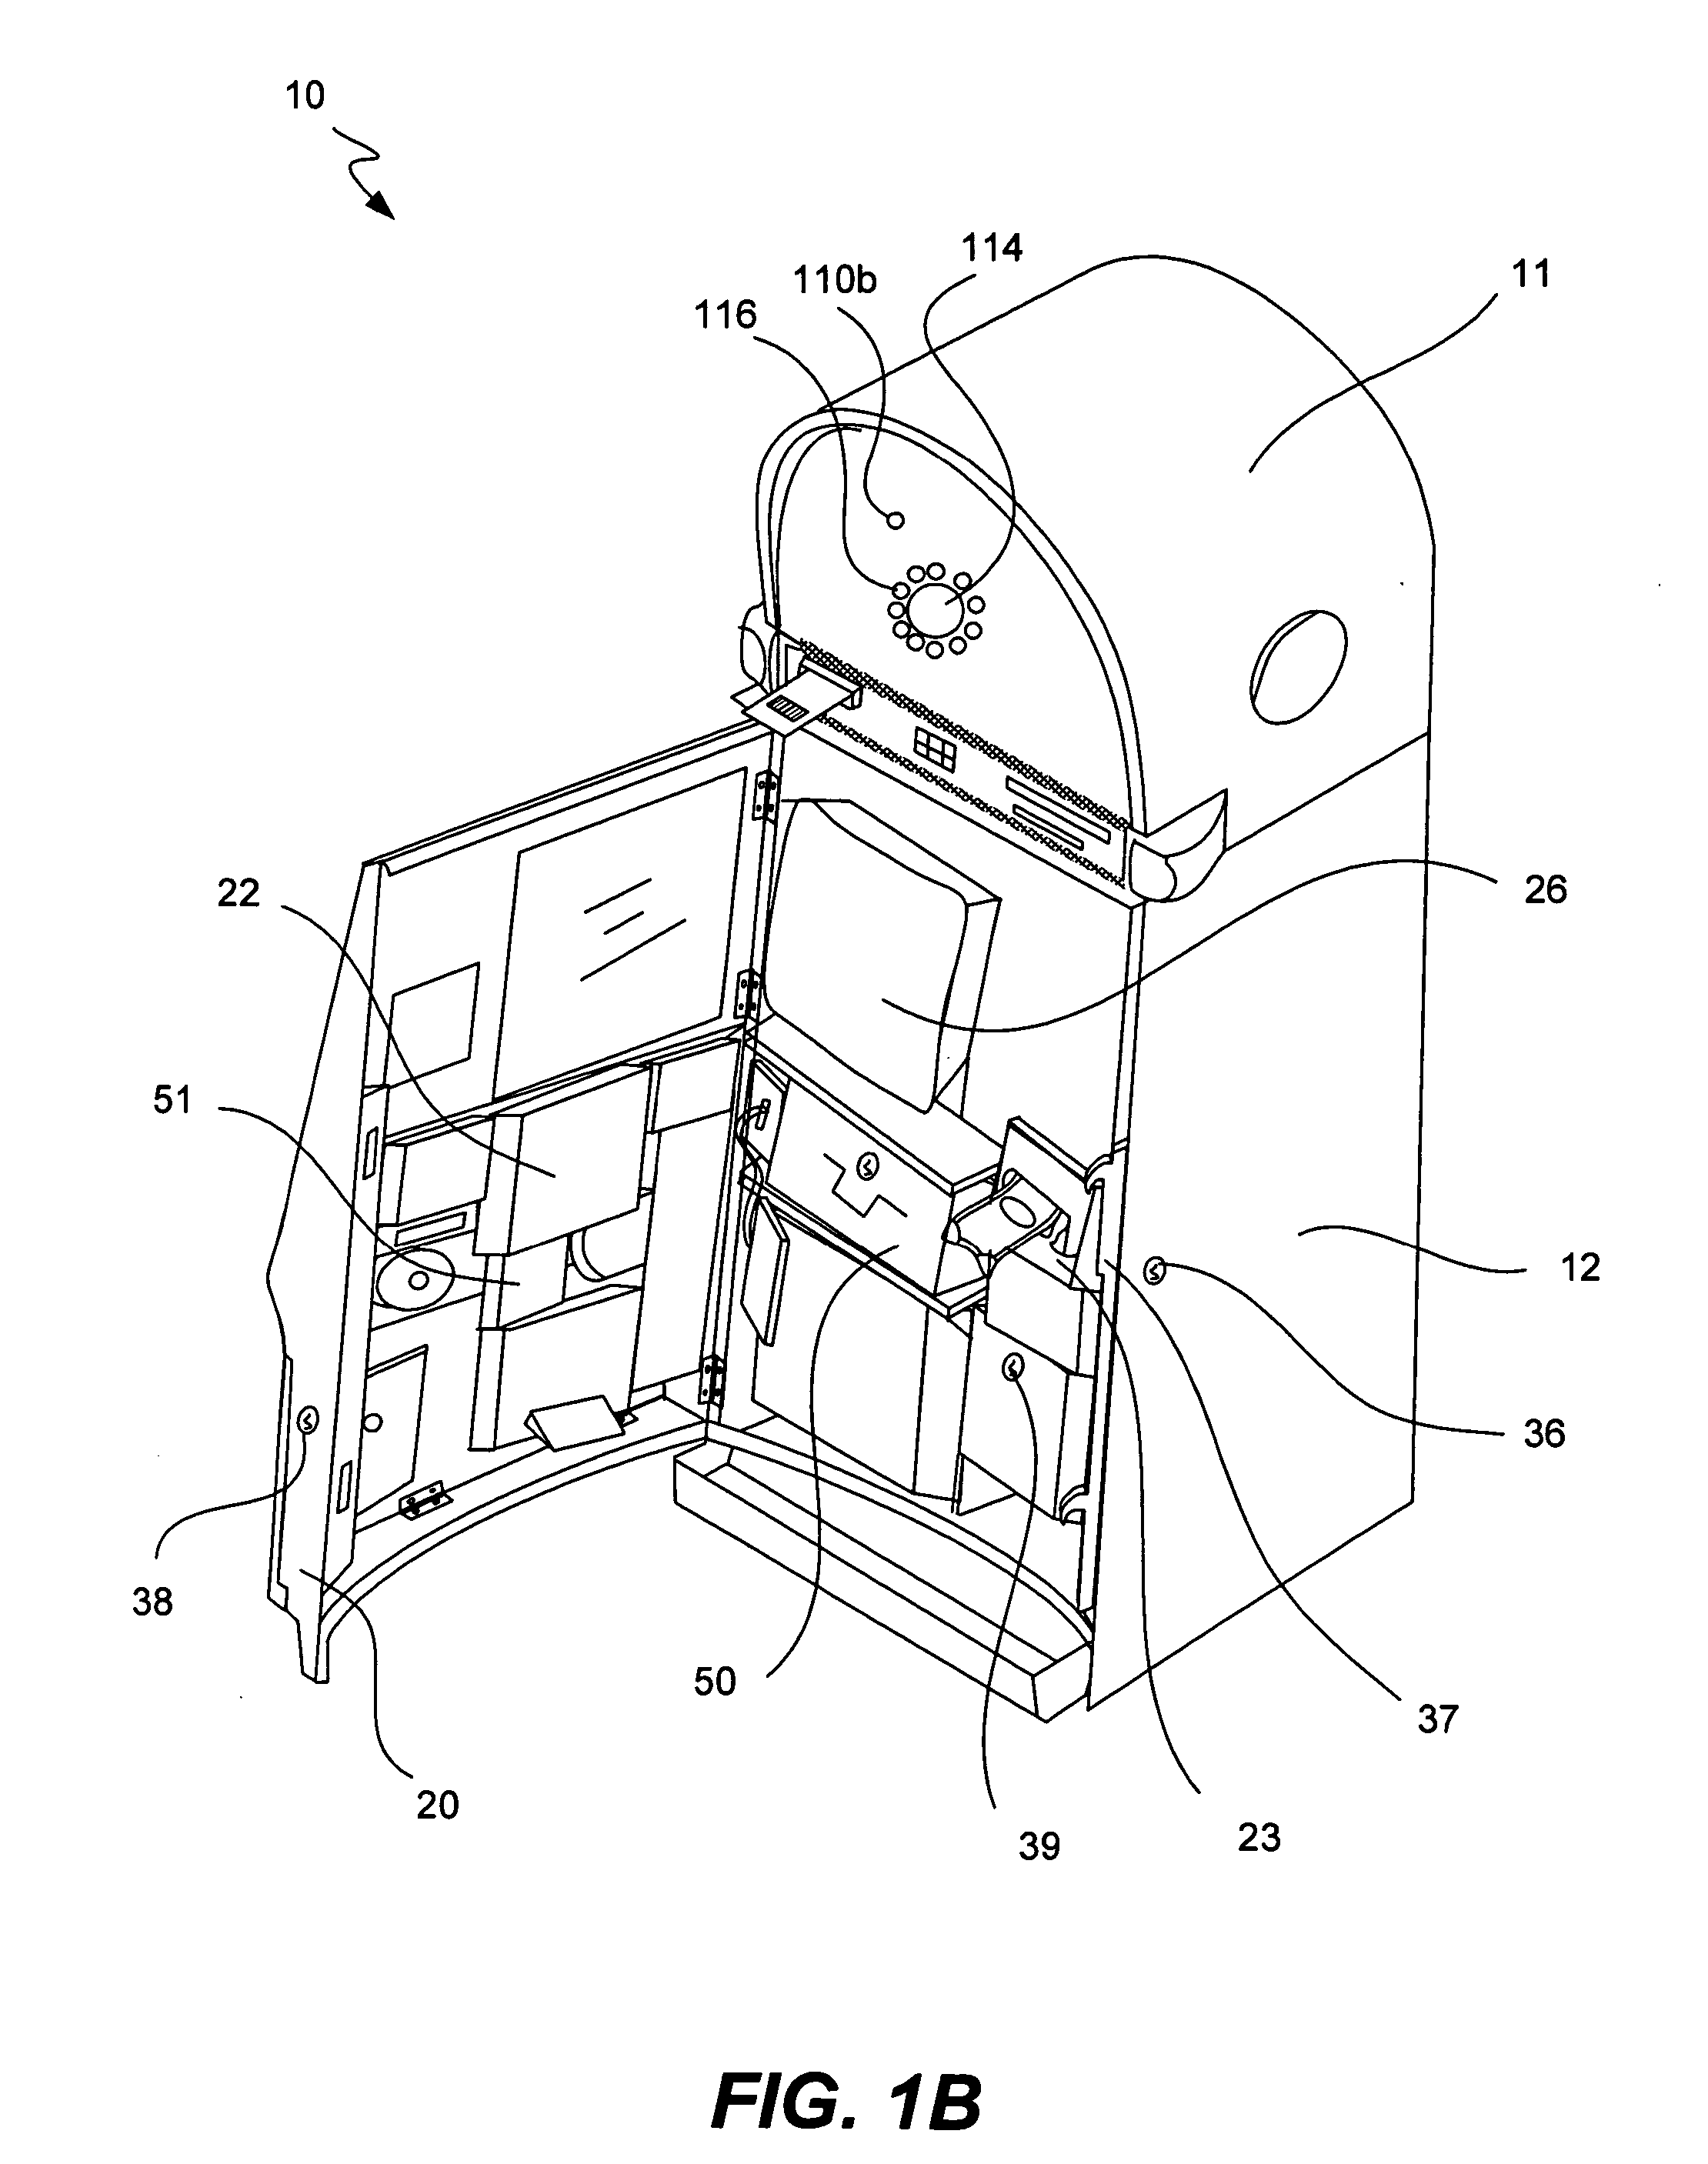 Gaming machine with scanning 3-D display system